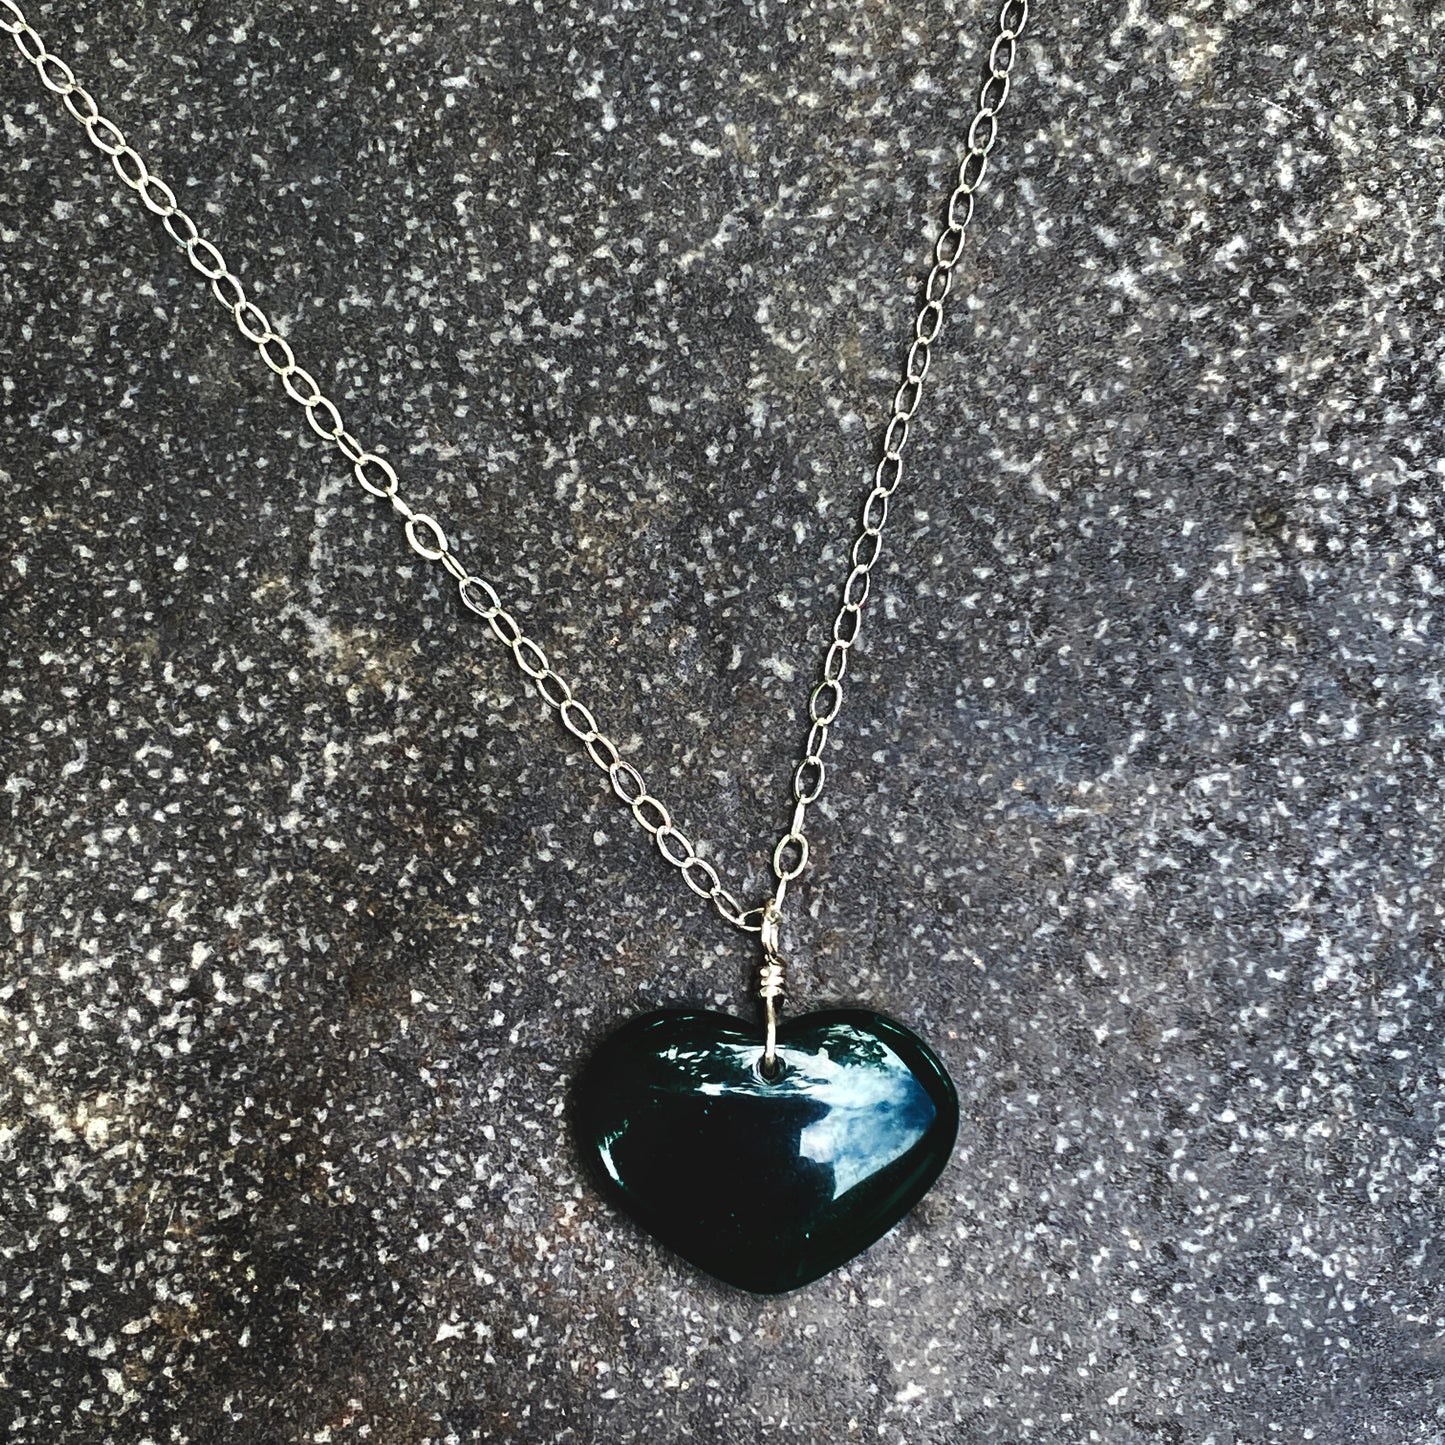 Green Agate Heart Necklace